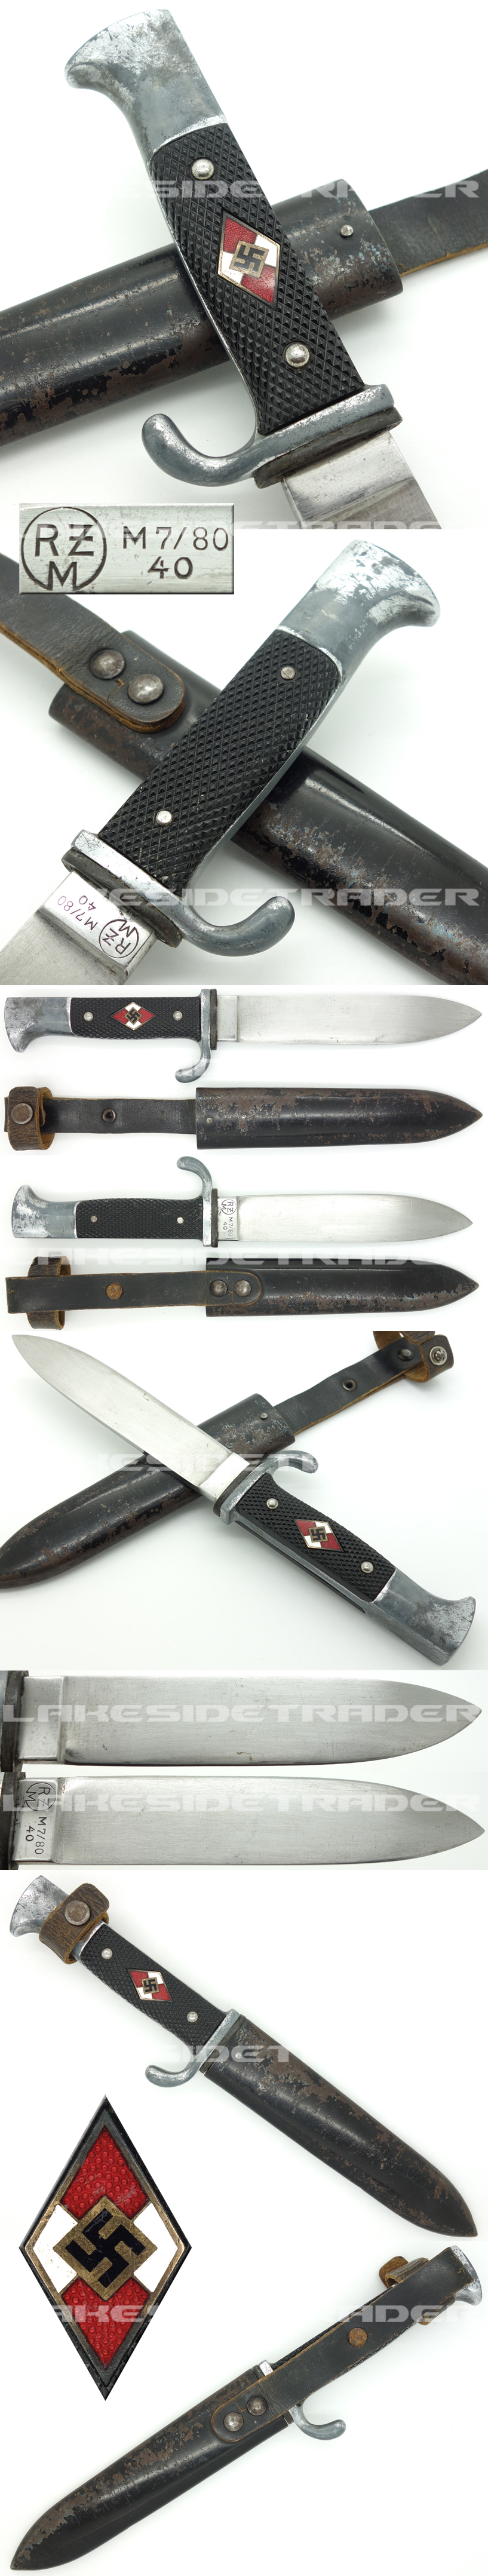 Hitler Youth Knife by RZM M7/80 1940